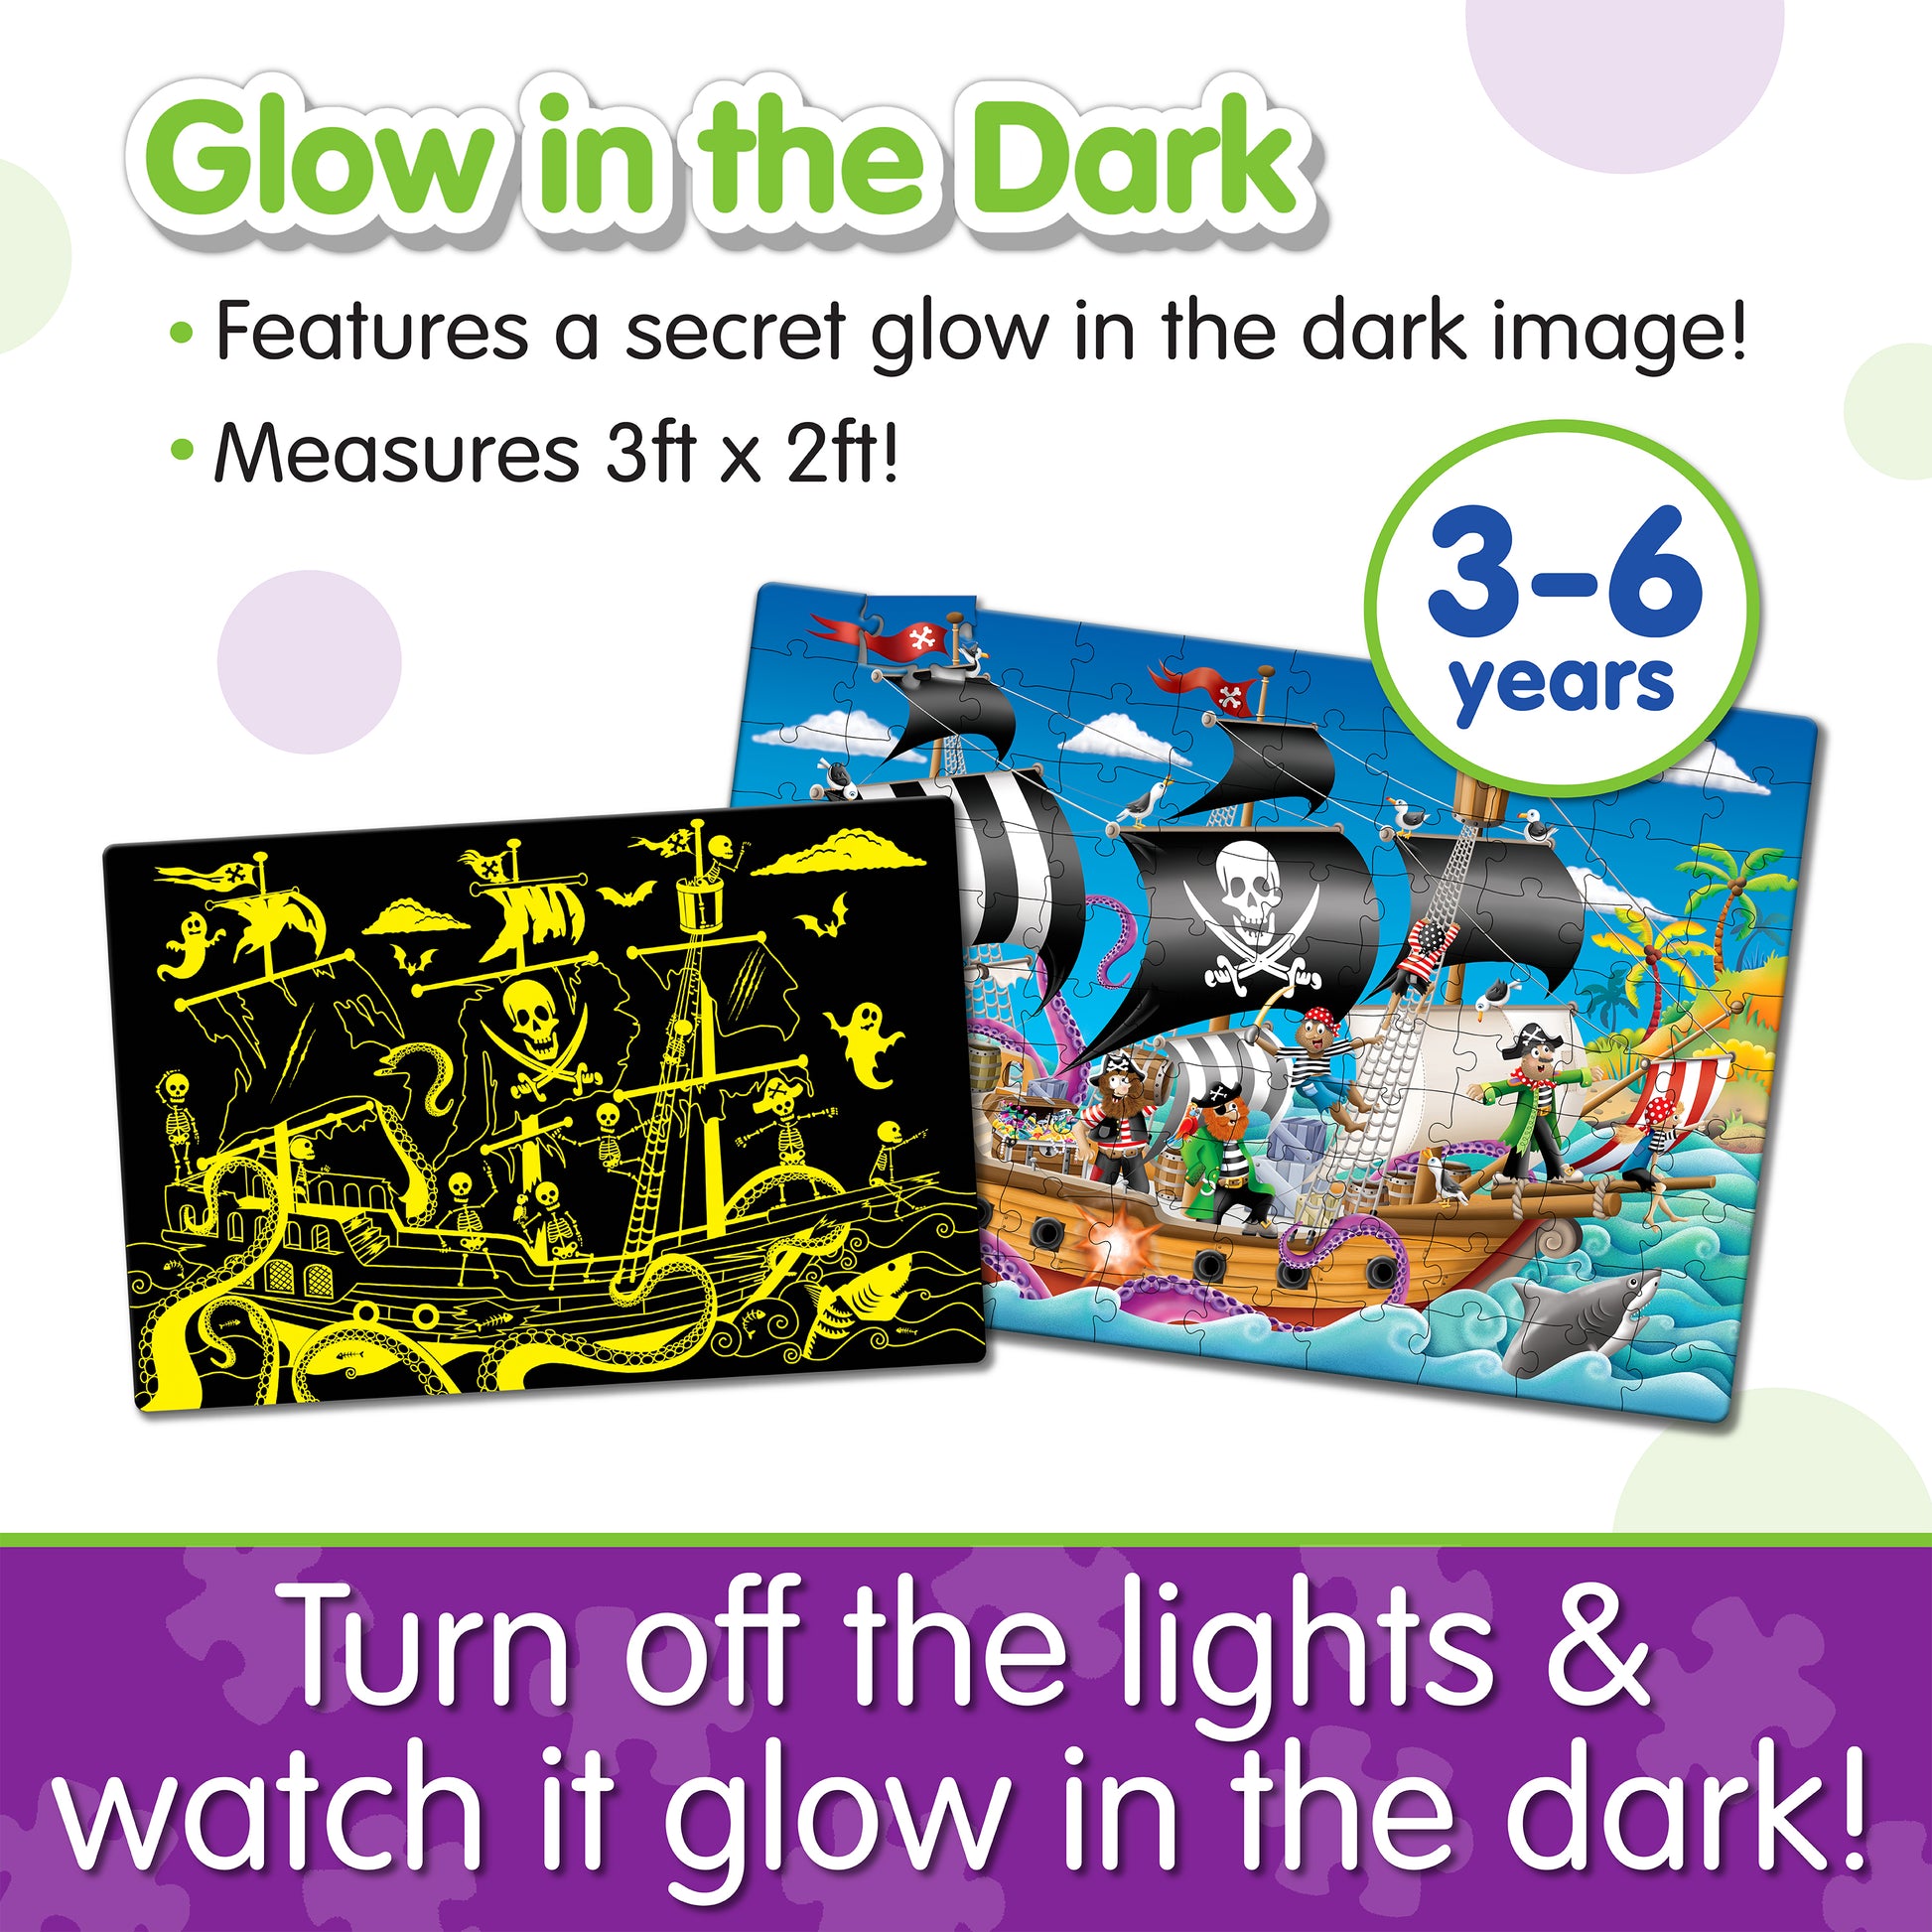 Infographic about Glow in the Dark - Pirate Ship that says, "Turn off the lights and watch it glow in the dark!"